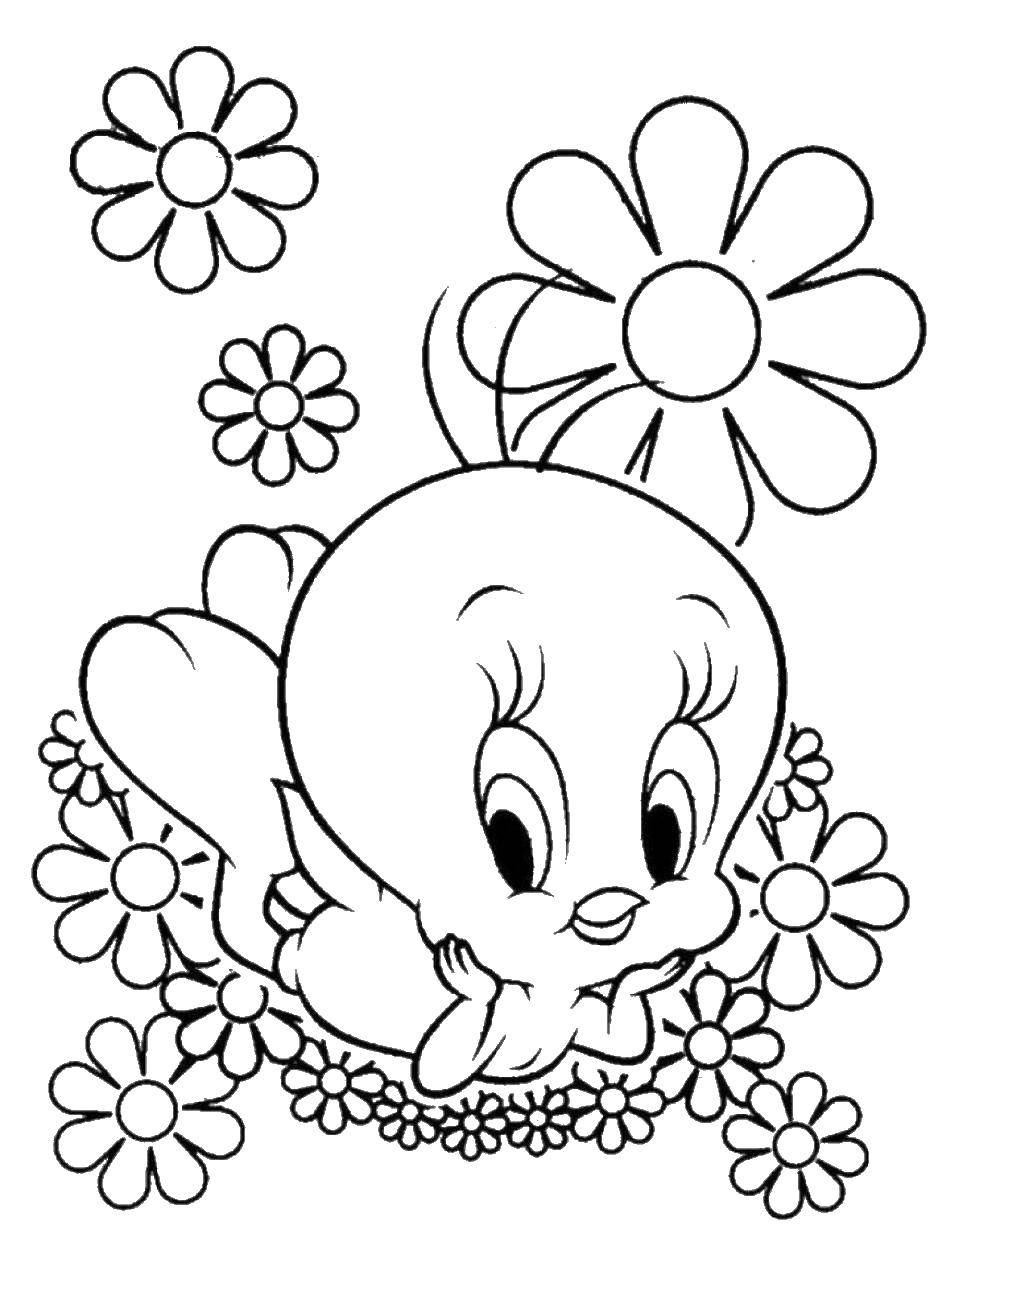 Coloring Canary Tweety. Category Disney coloring pages. Tags:  Twitty.